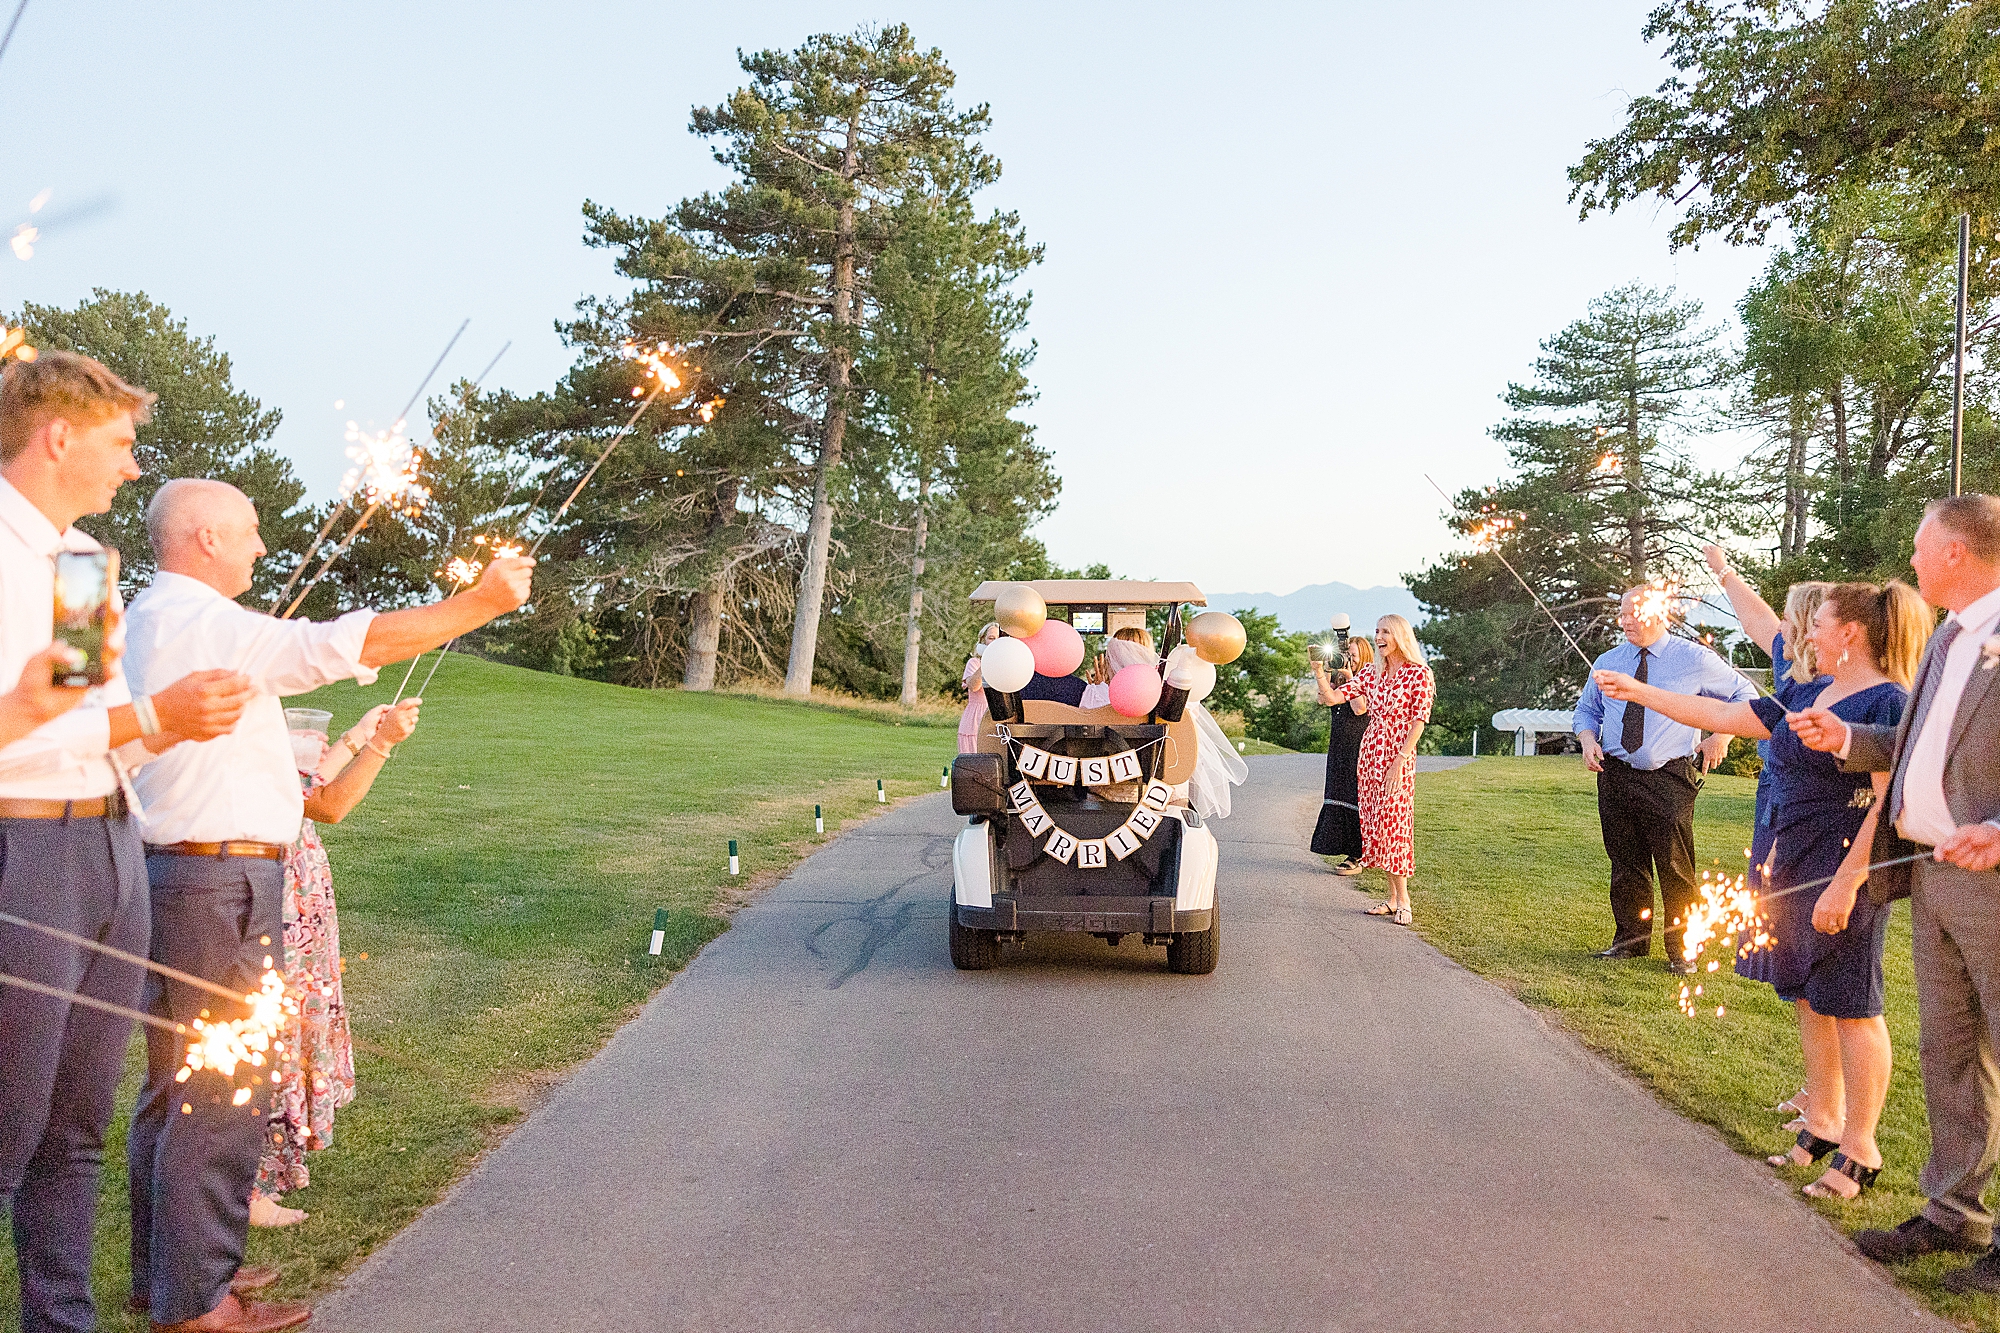 Colorful sparklers light up the night sky as the couple makes their grand exit in a decorated golf cart.
